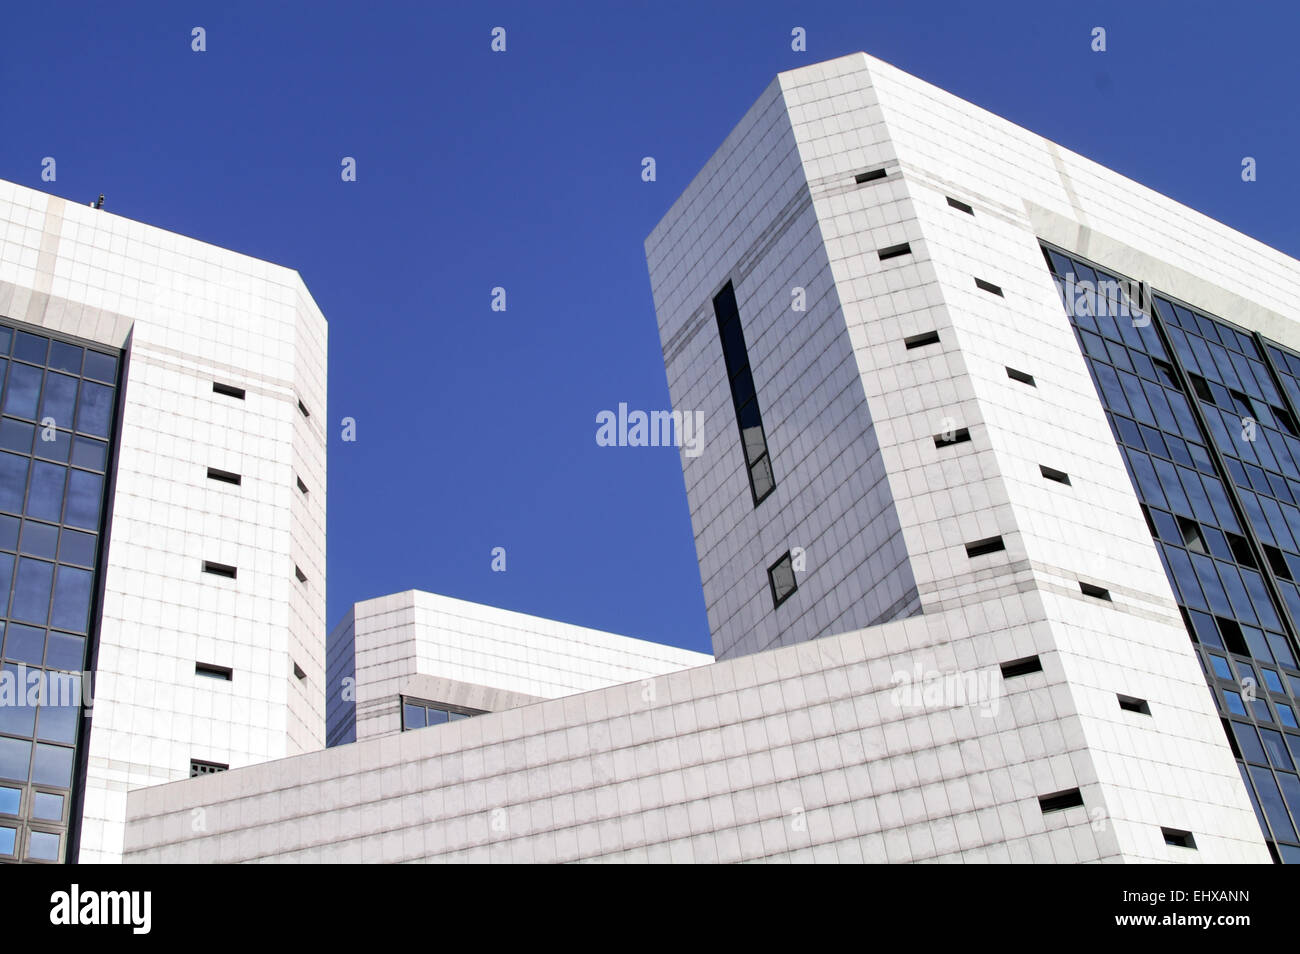 Modern sleek office building with white marble tiles in a blue sky Stock Photo